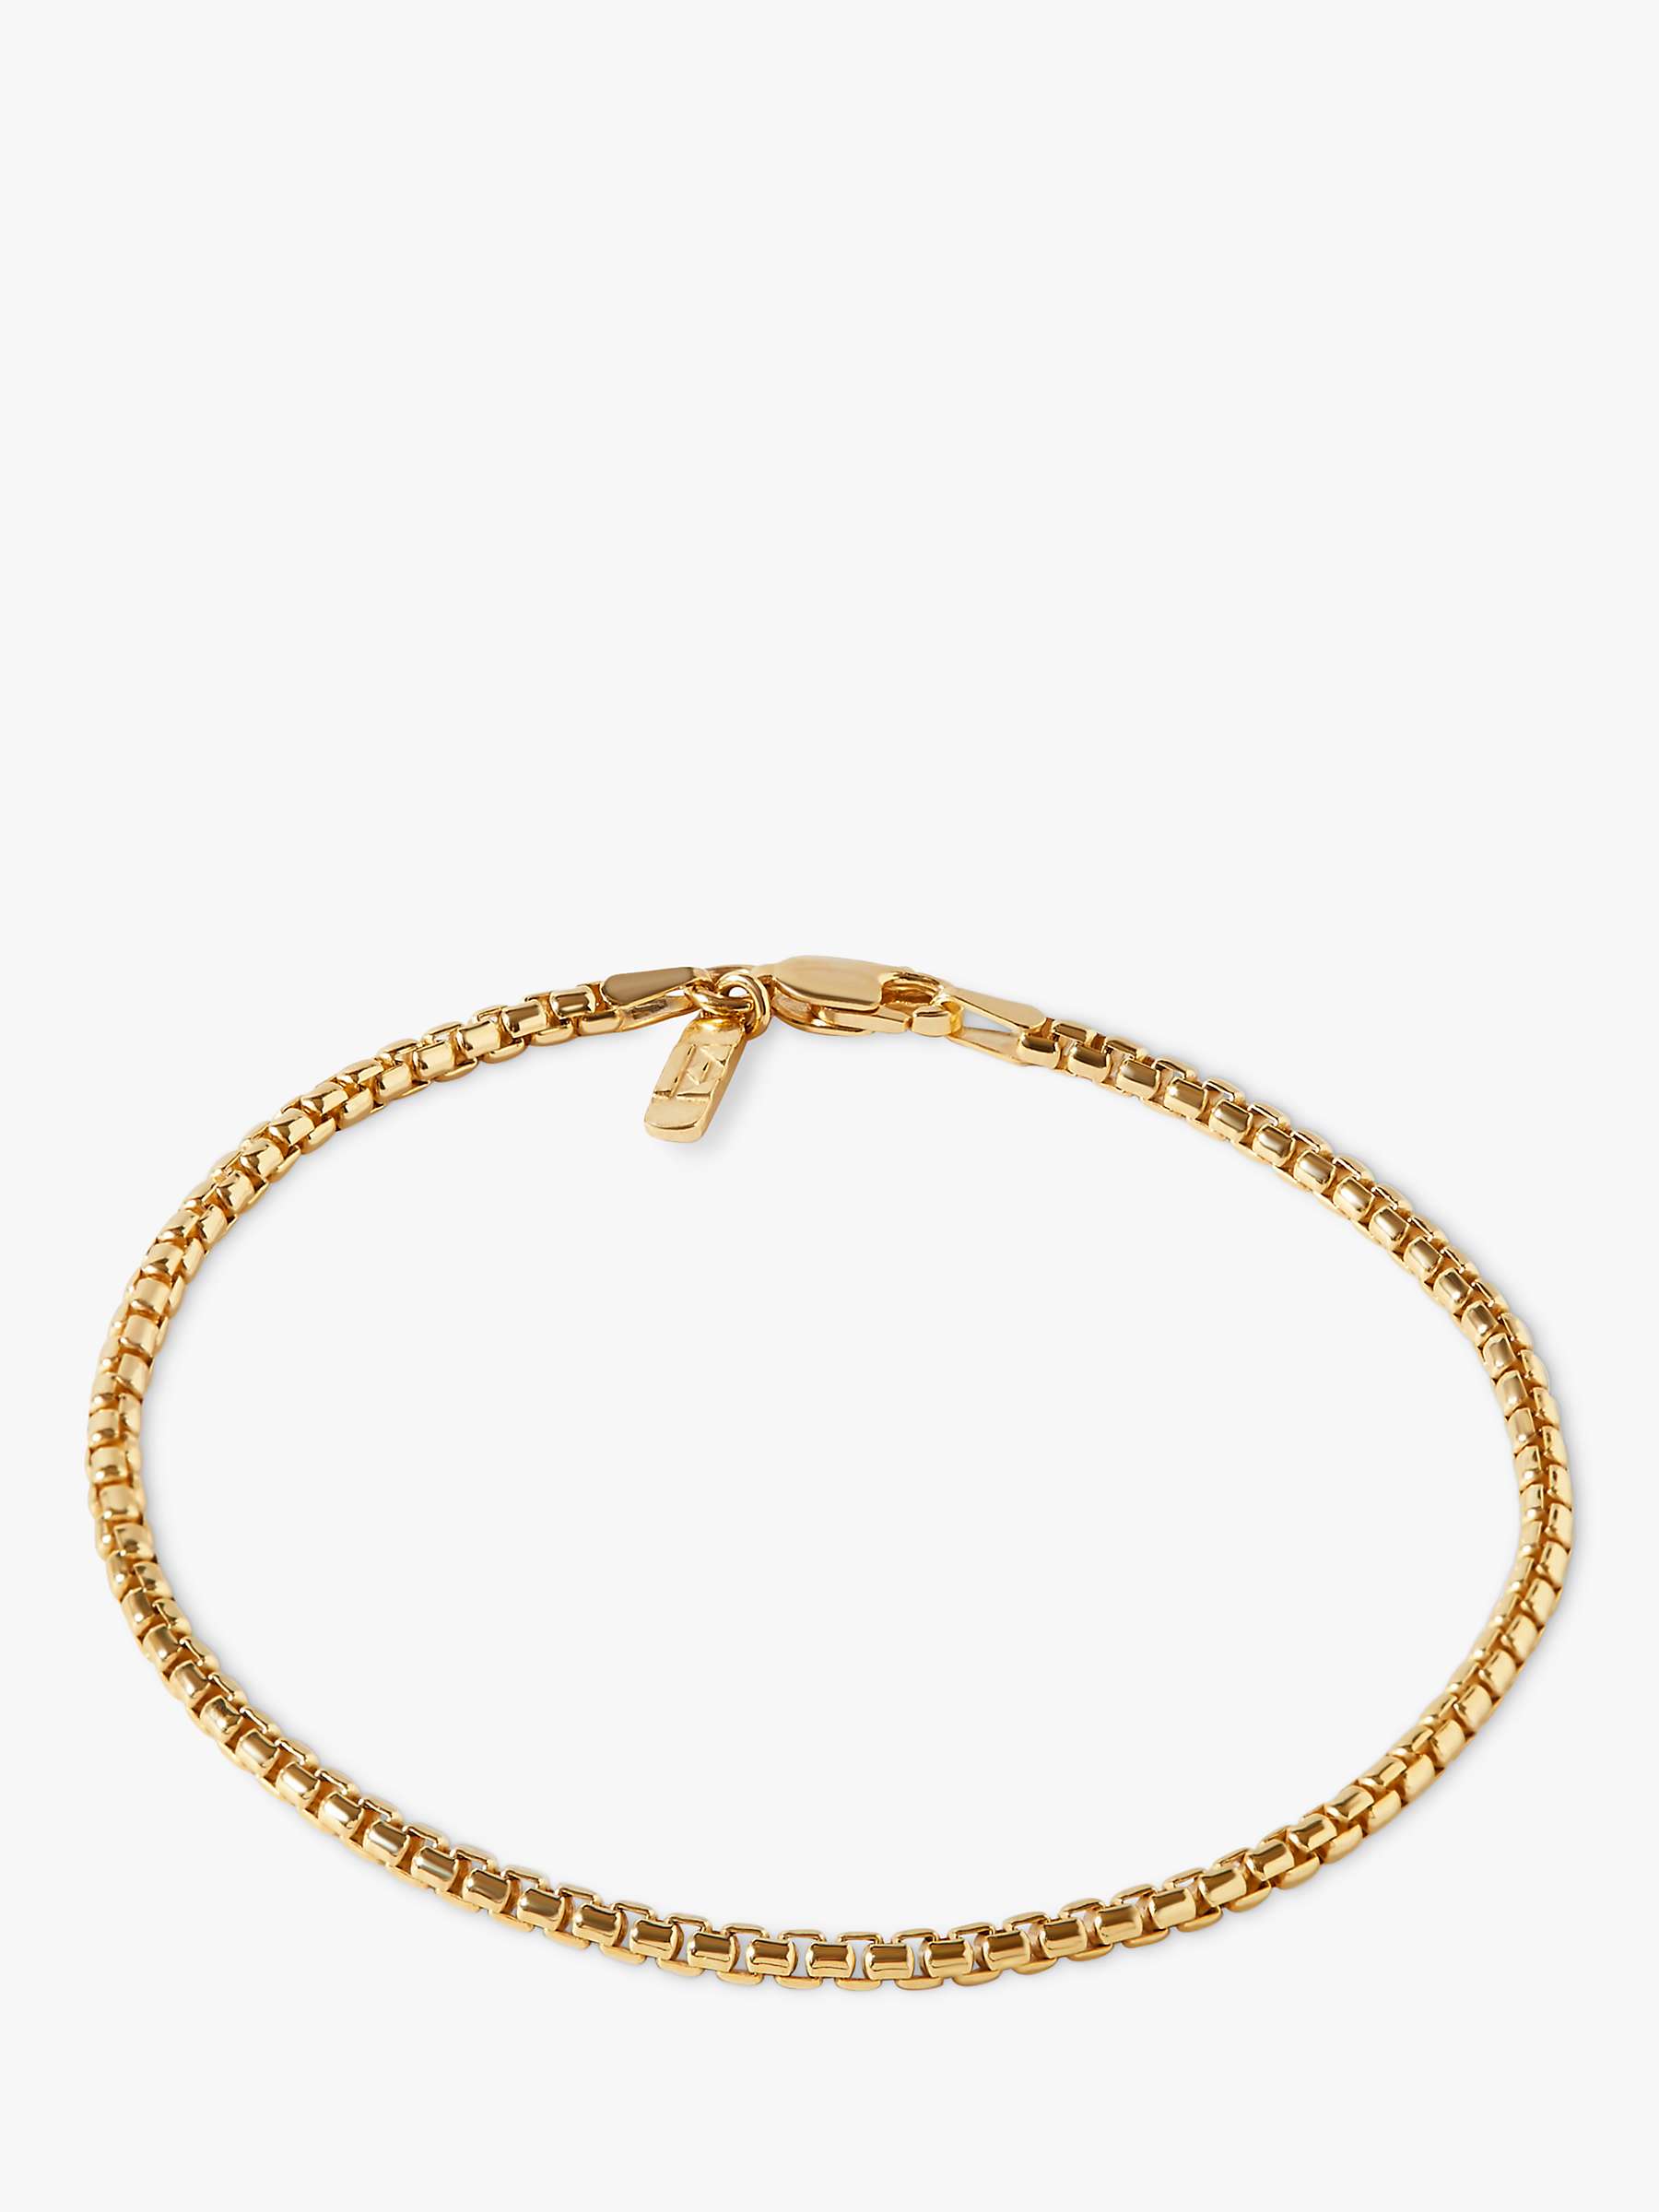 Buy Edge of Ember Chunky Box Chain Bracelet, Yellow Gold Online at johnlewis.com